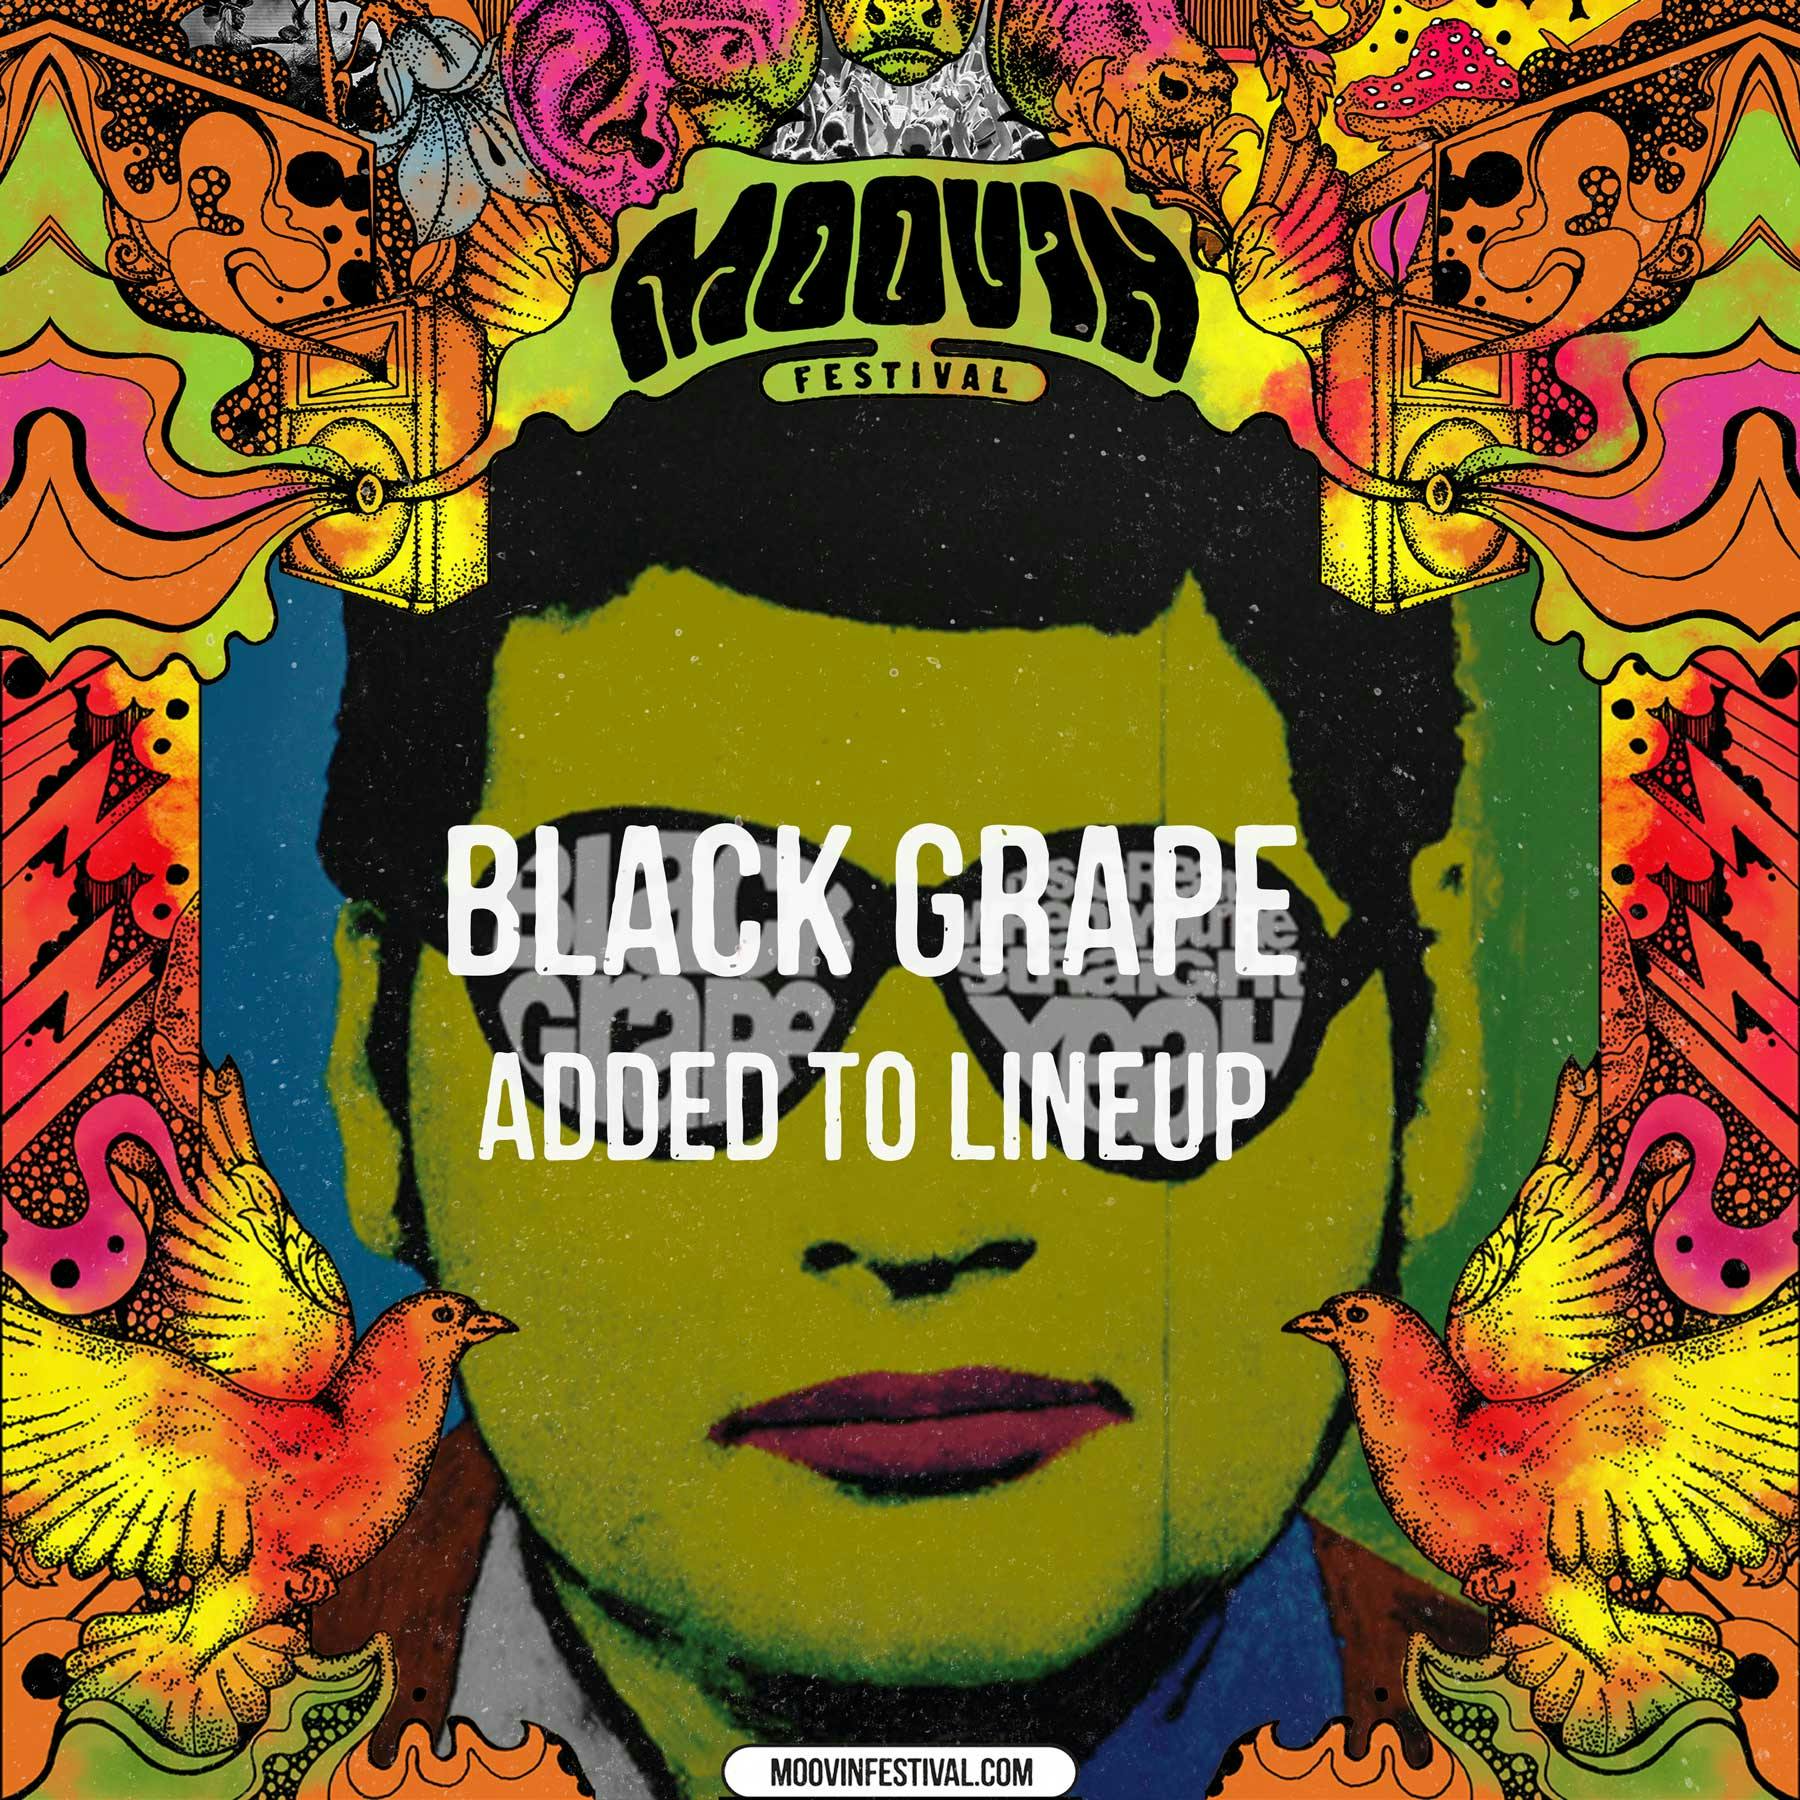 Black Grape added to lineup